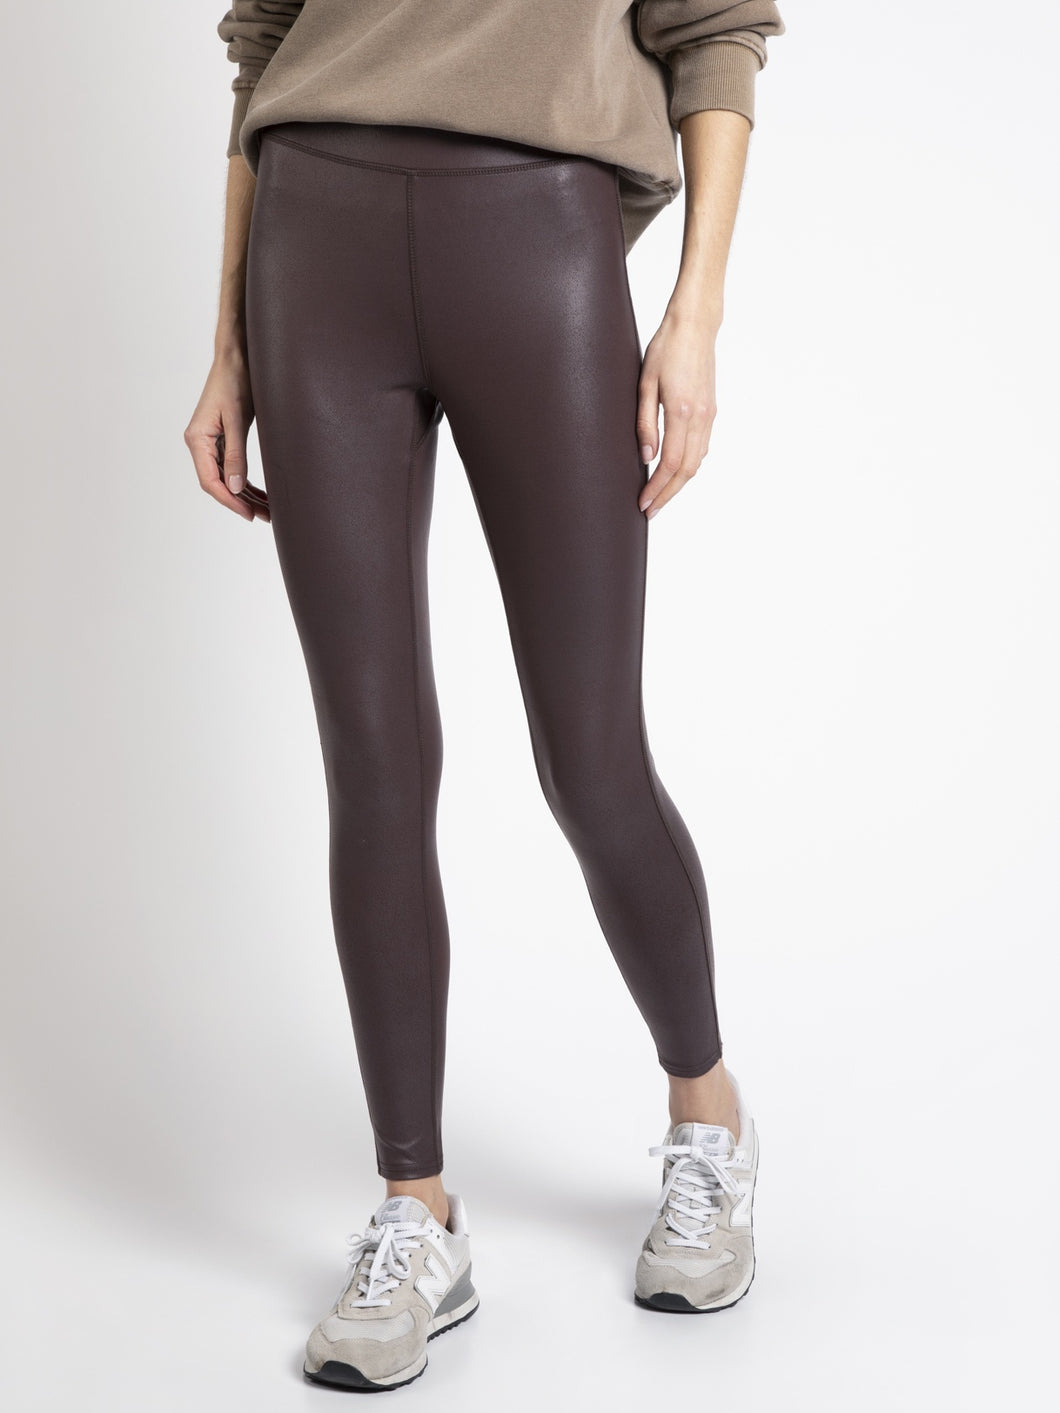 Grounded Warrior Leggings  Ava Lane Boutique - Women's clothing and  accessories